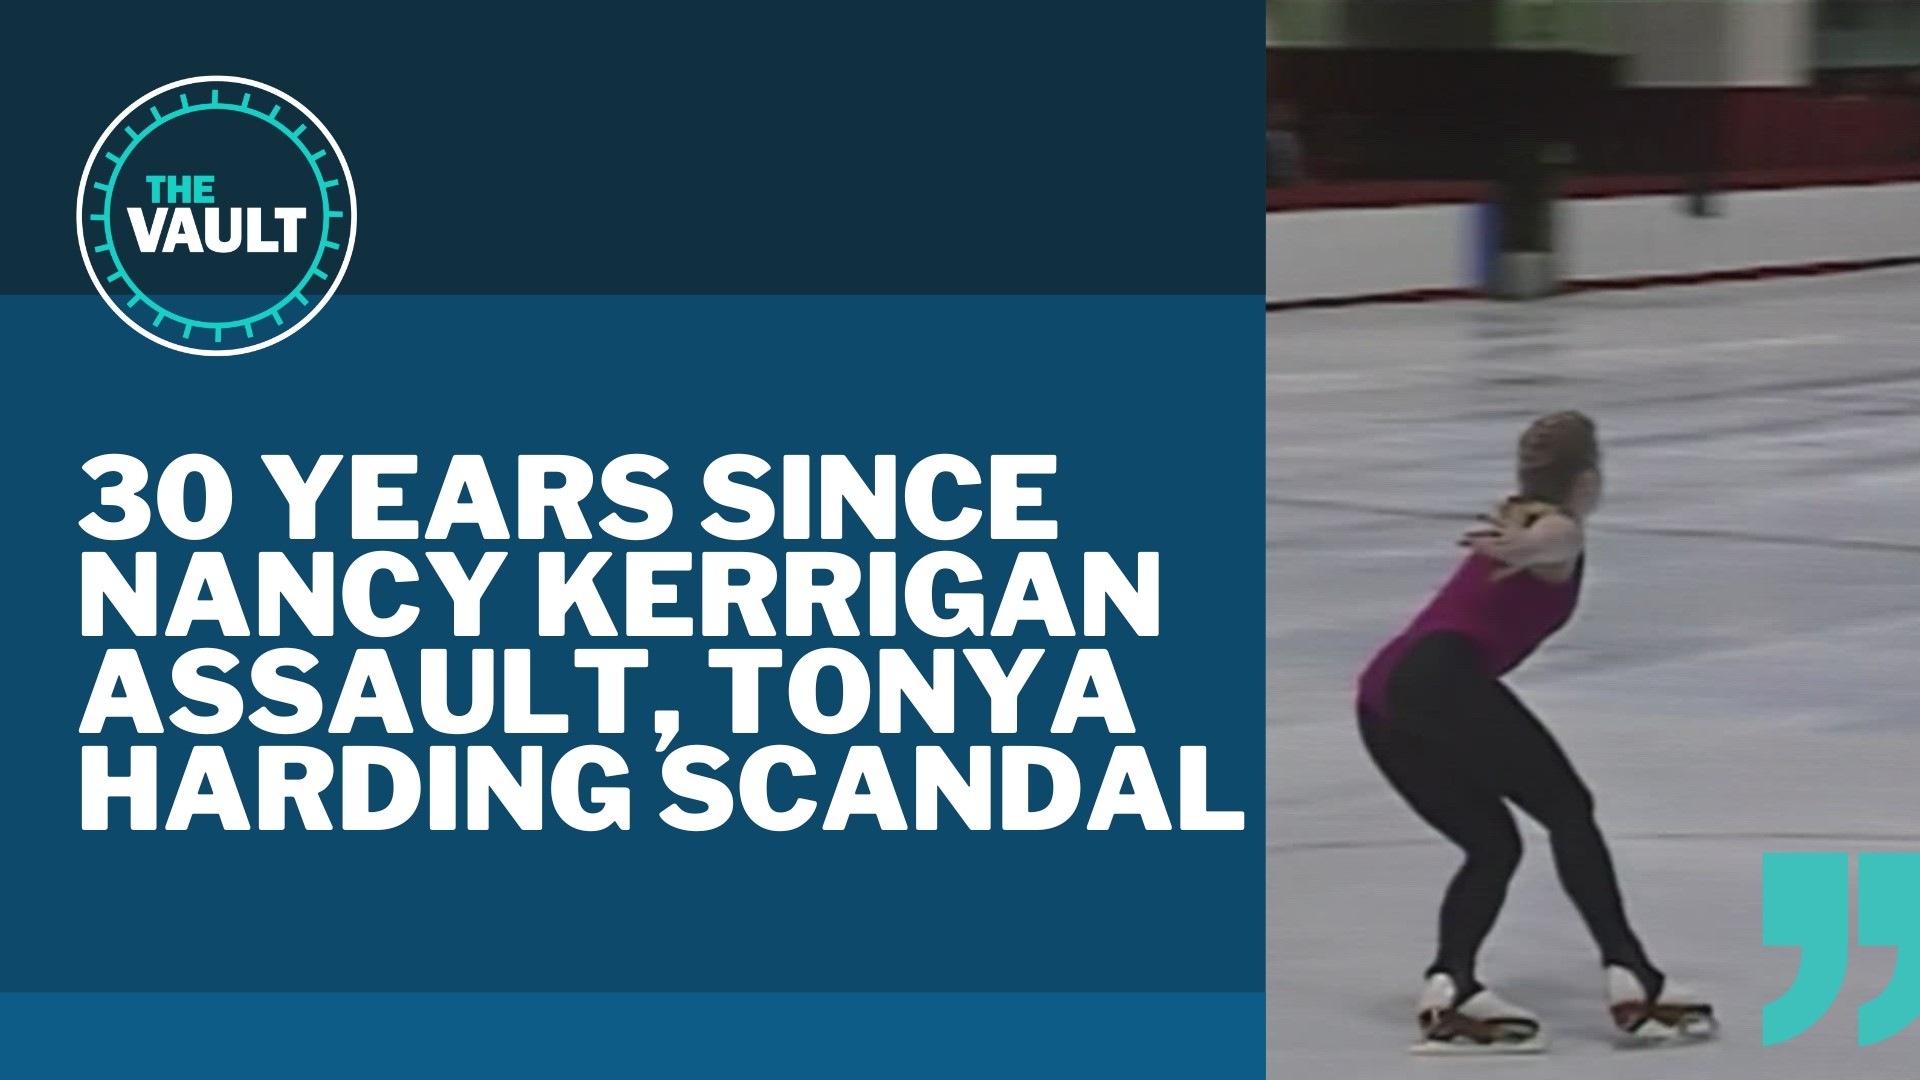 After an assault on skater Nancy Kerrigan, the investigation led back to the ex-husband of Portland skater Tonya Harding. The case came to a head 30 years ago.